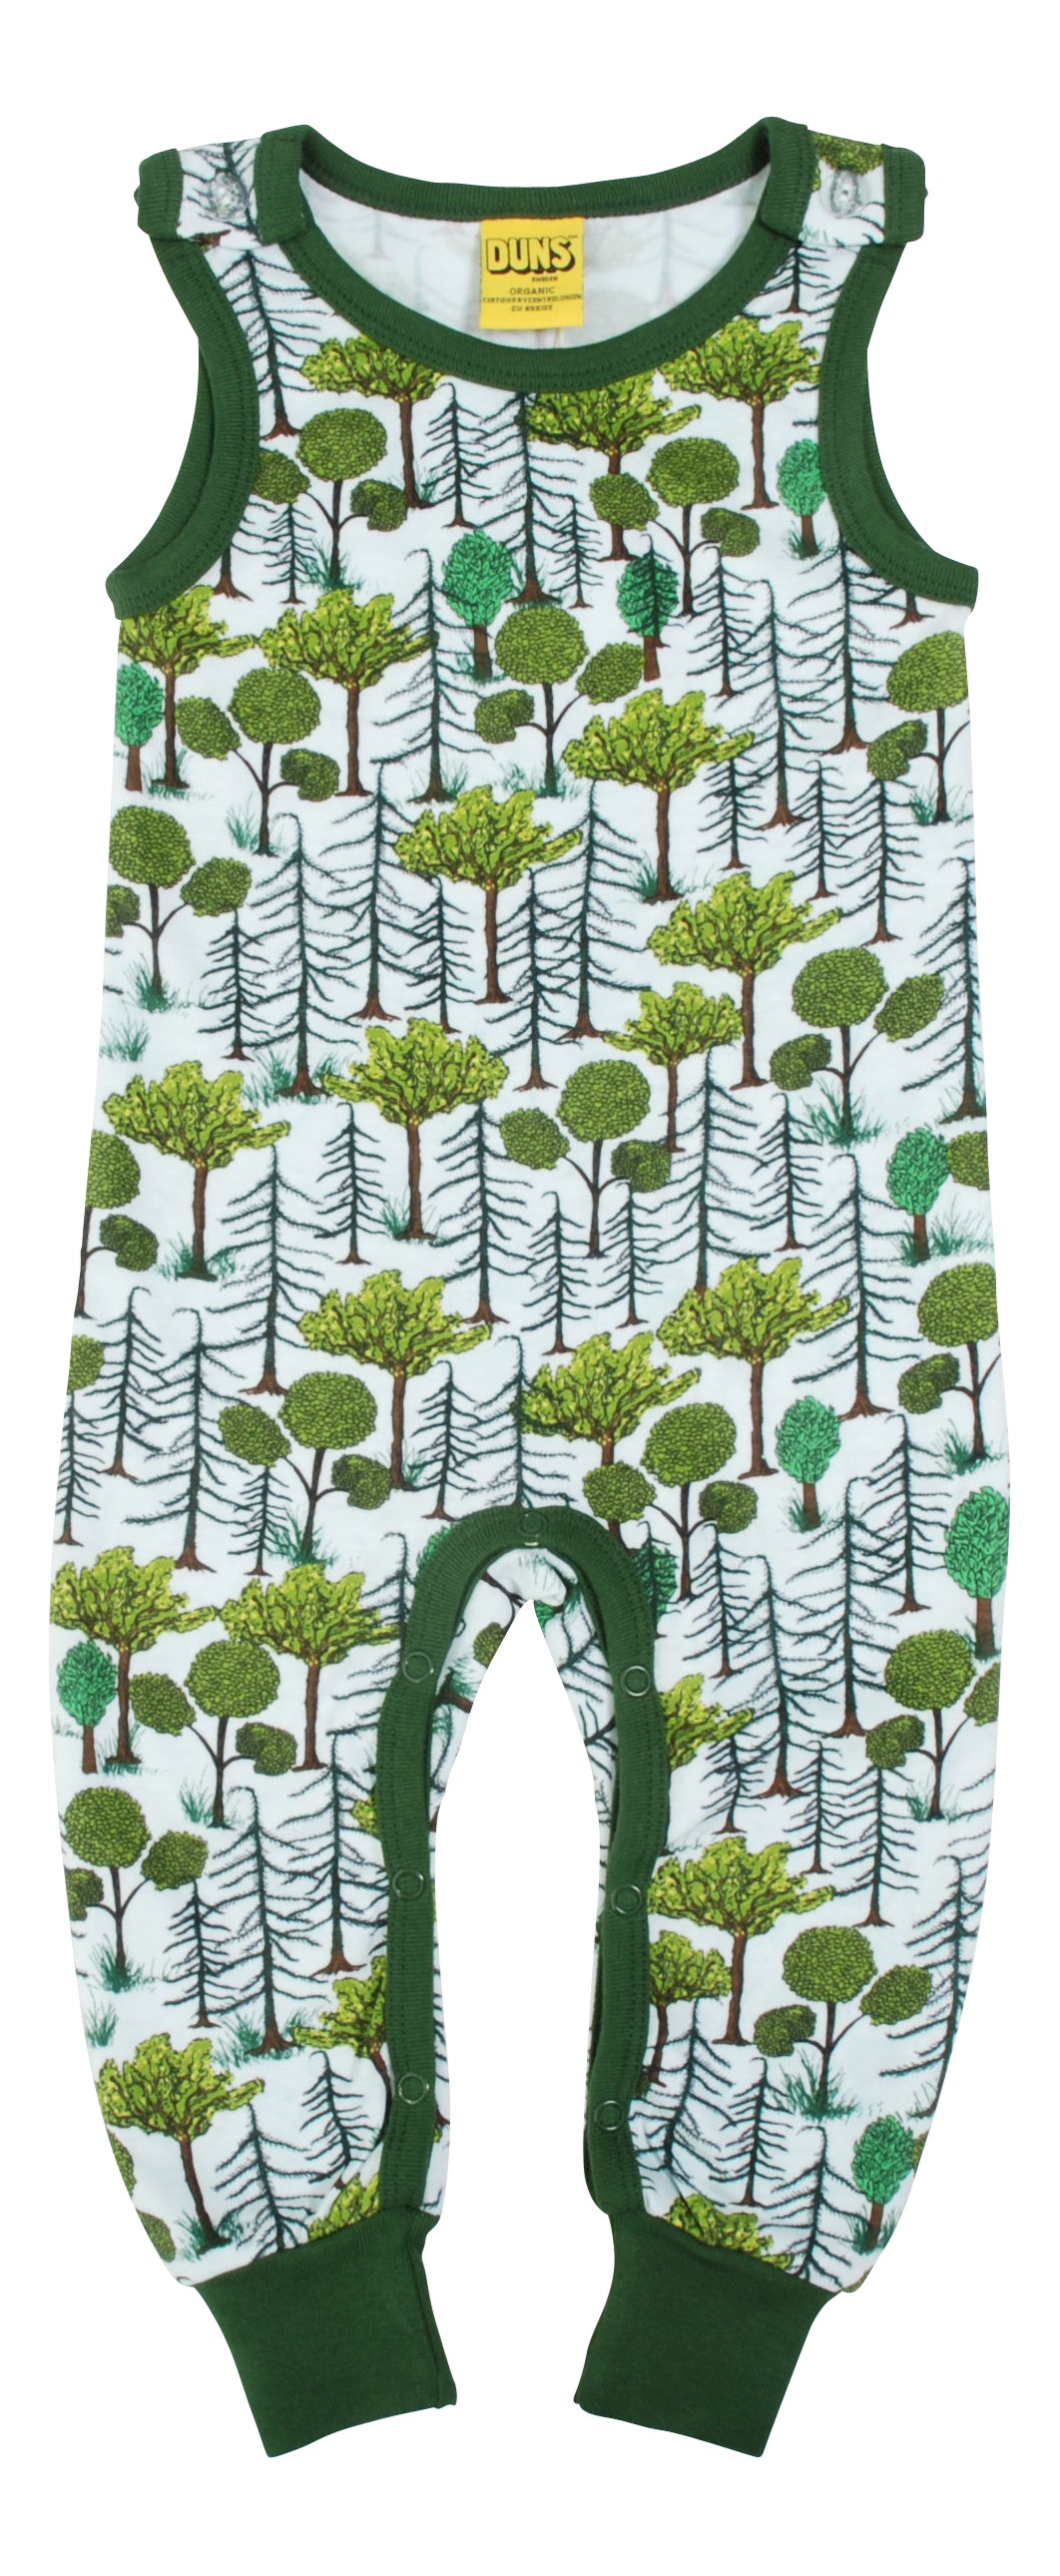 Duns Sweden - Playsuit Enchanted Forest - Dungaree Betoved Bos